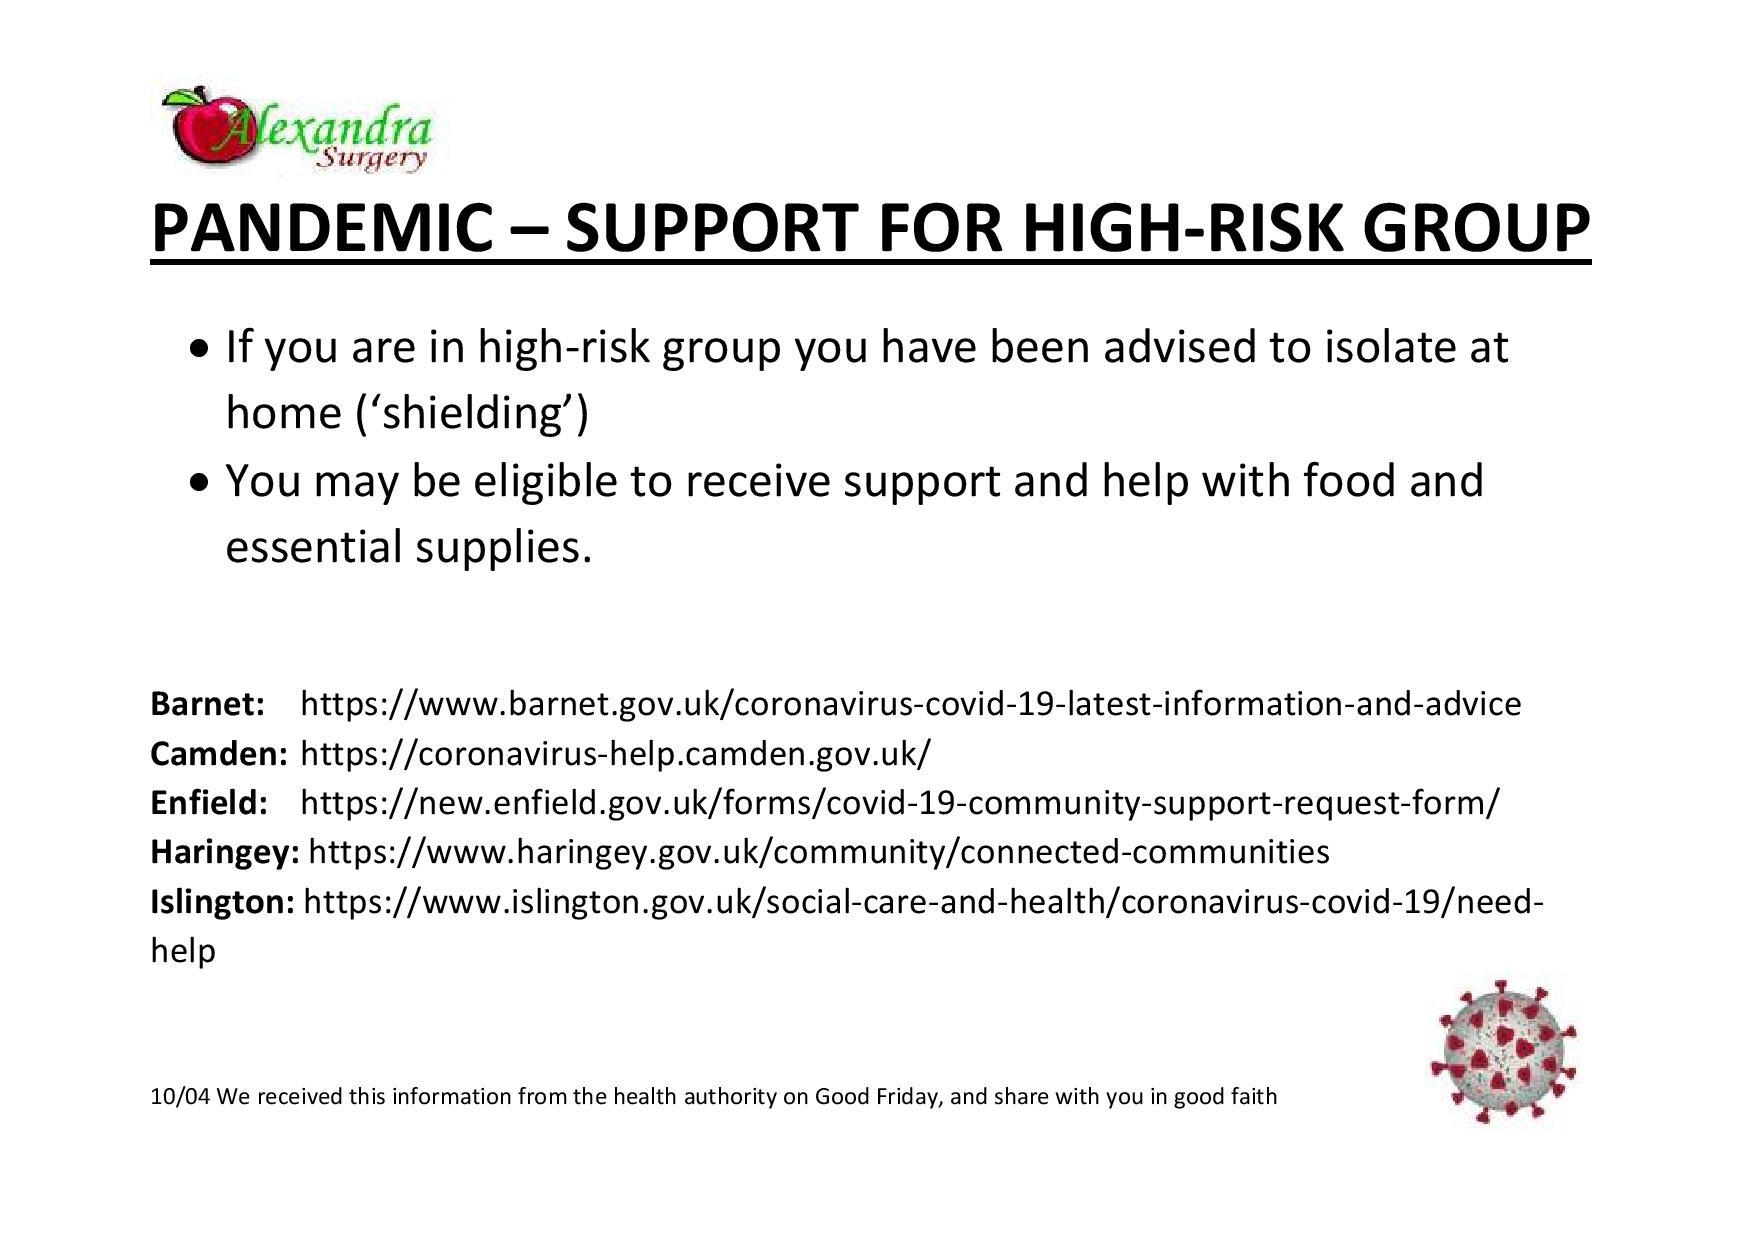 High risk group eligible for help